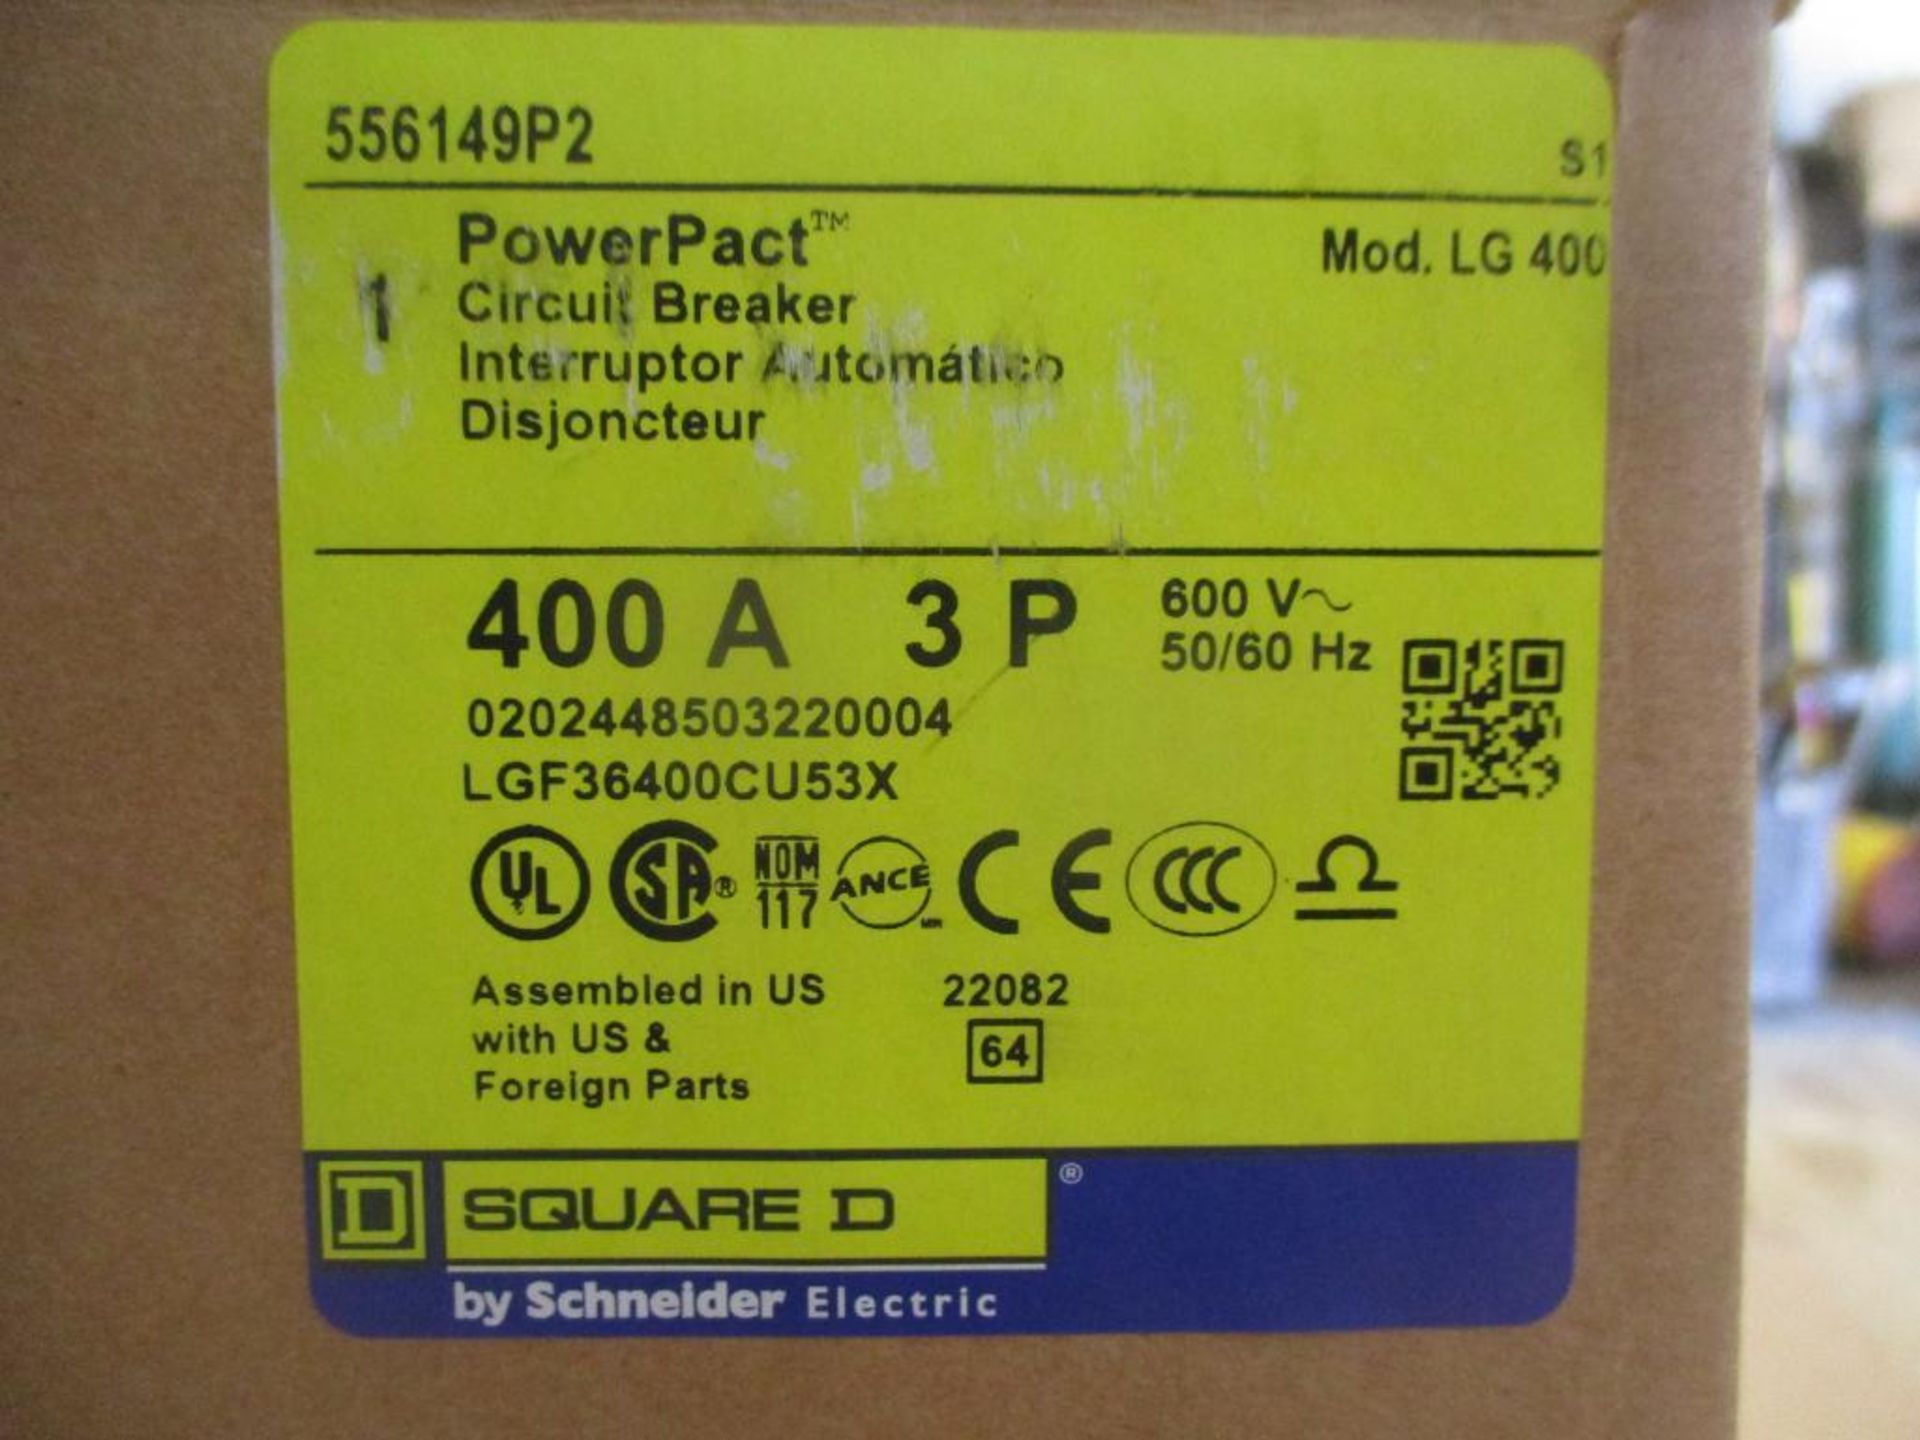 Square D 400 AMP Circuit Breaker, 556149P2, 400A, 3P, 600VAC, PowerPacT LG 400 (New in Box) - Image 4 of 4